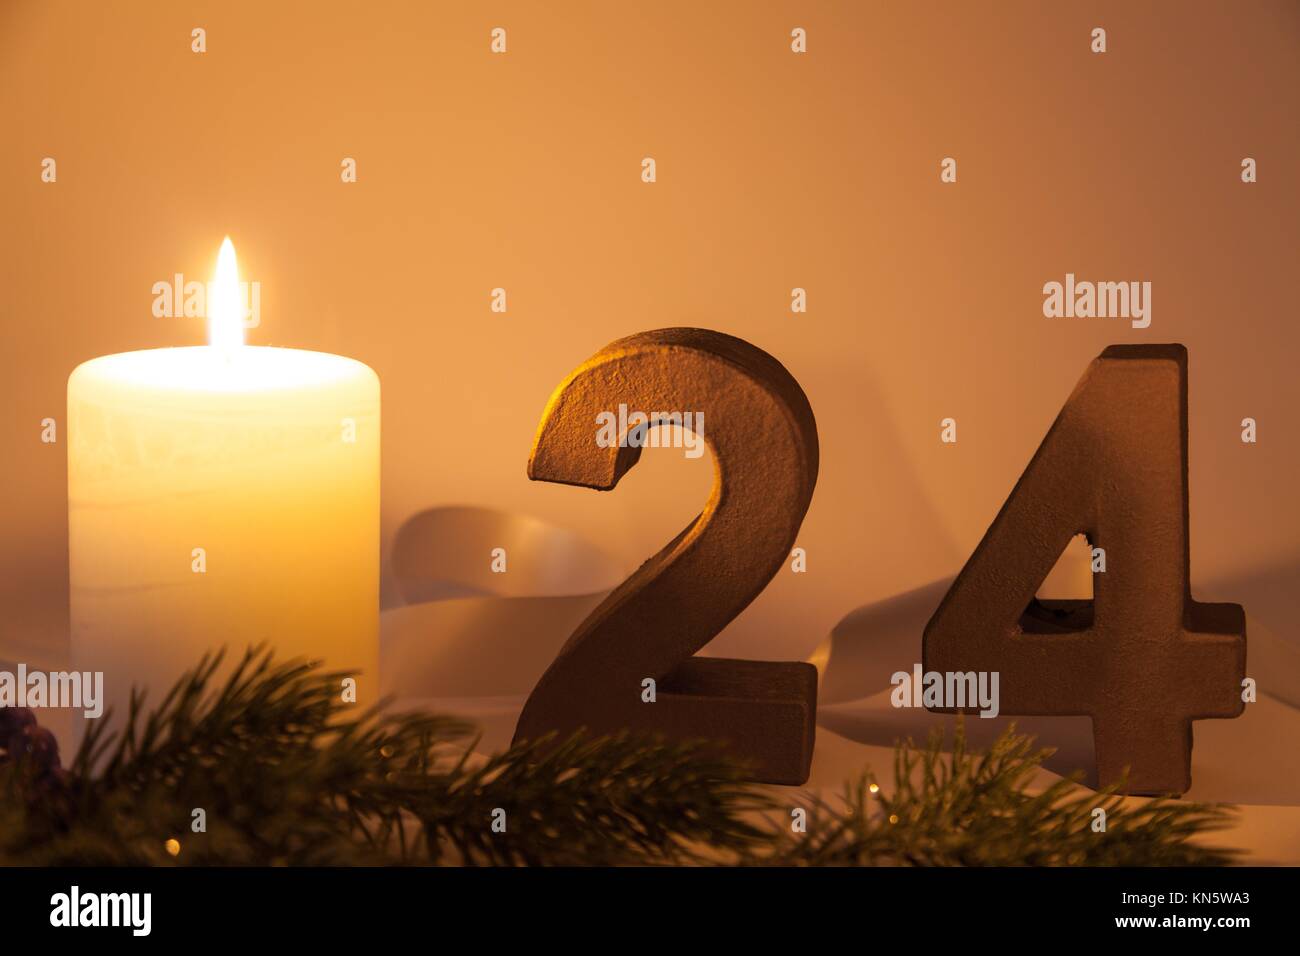 24th of december with white candle. Stock Photo